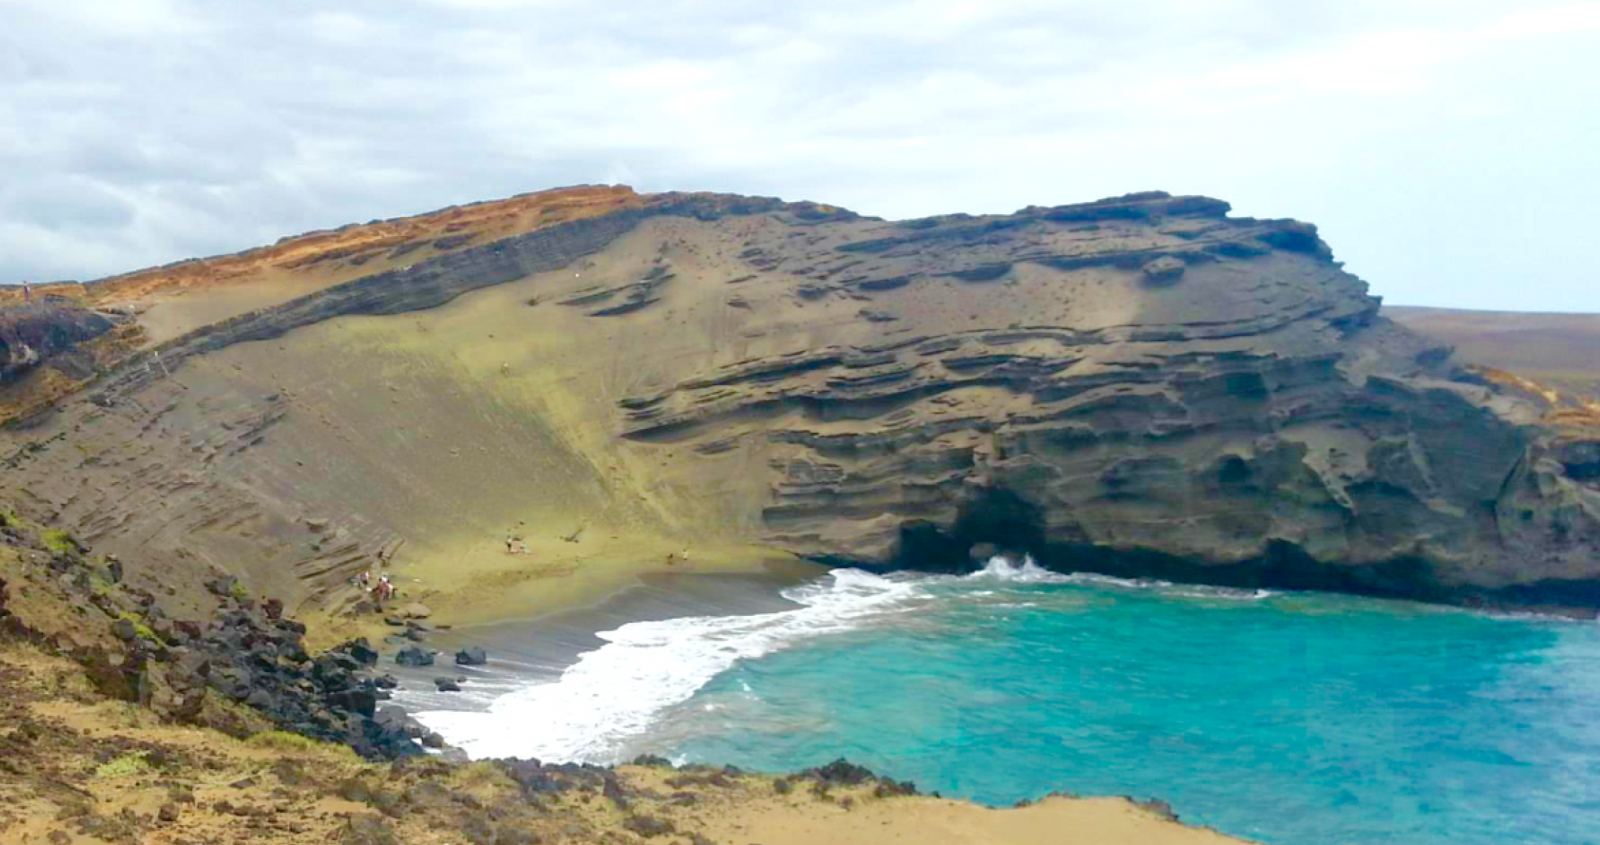 The world's only green sand beach - one of Hawaii's best beaches. 